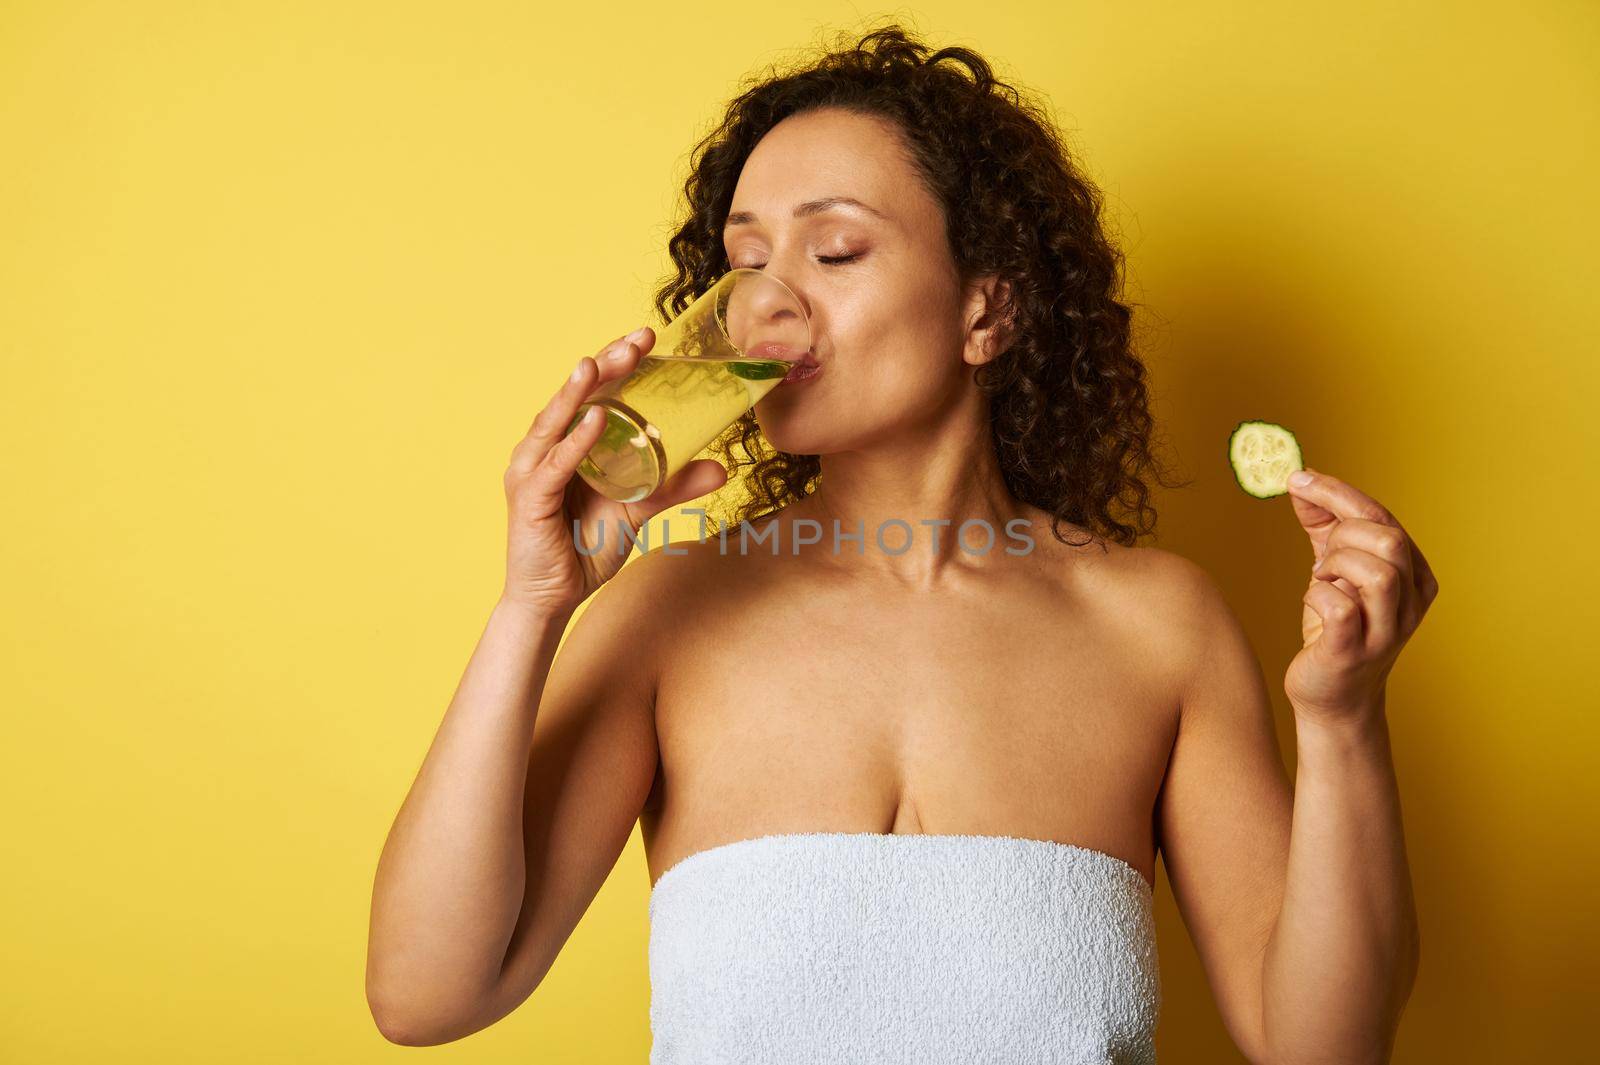 Young half-naked woman, wrapped in a towel, holding a slice of cucumber and drinking water from a glass, standing against a yellow background with space for text